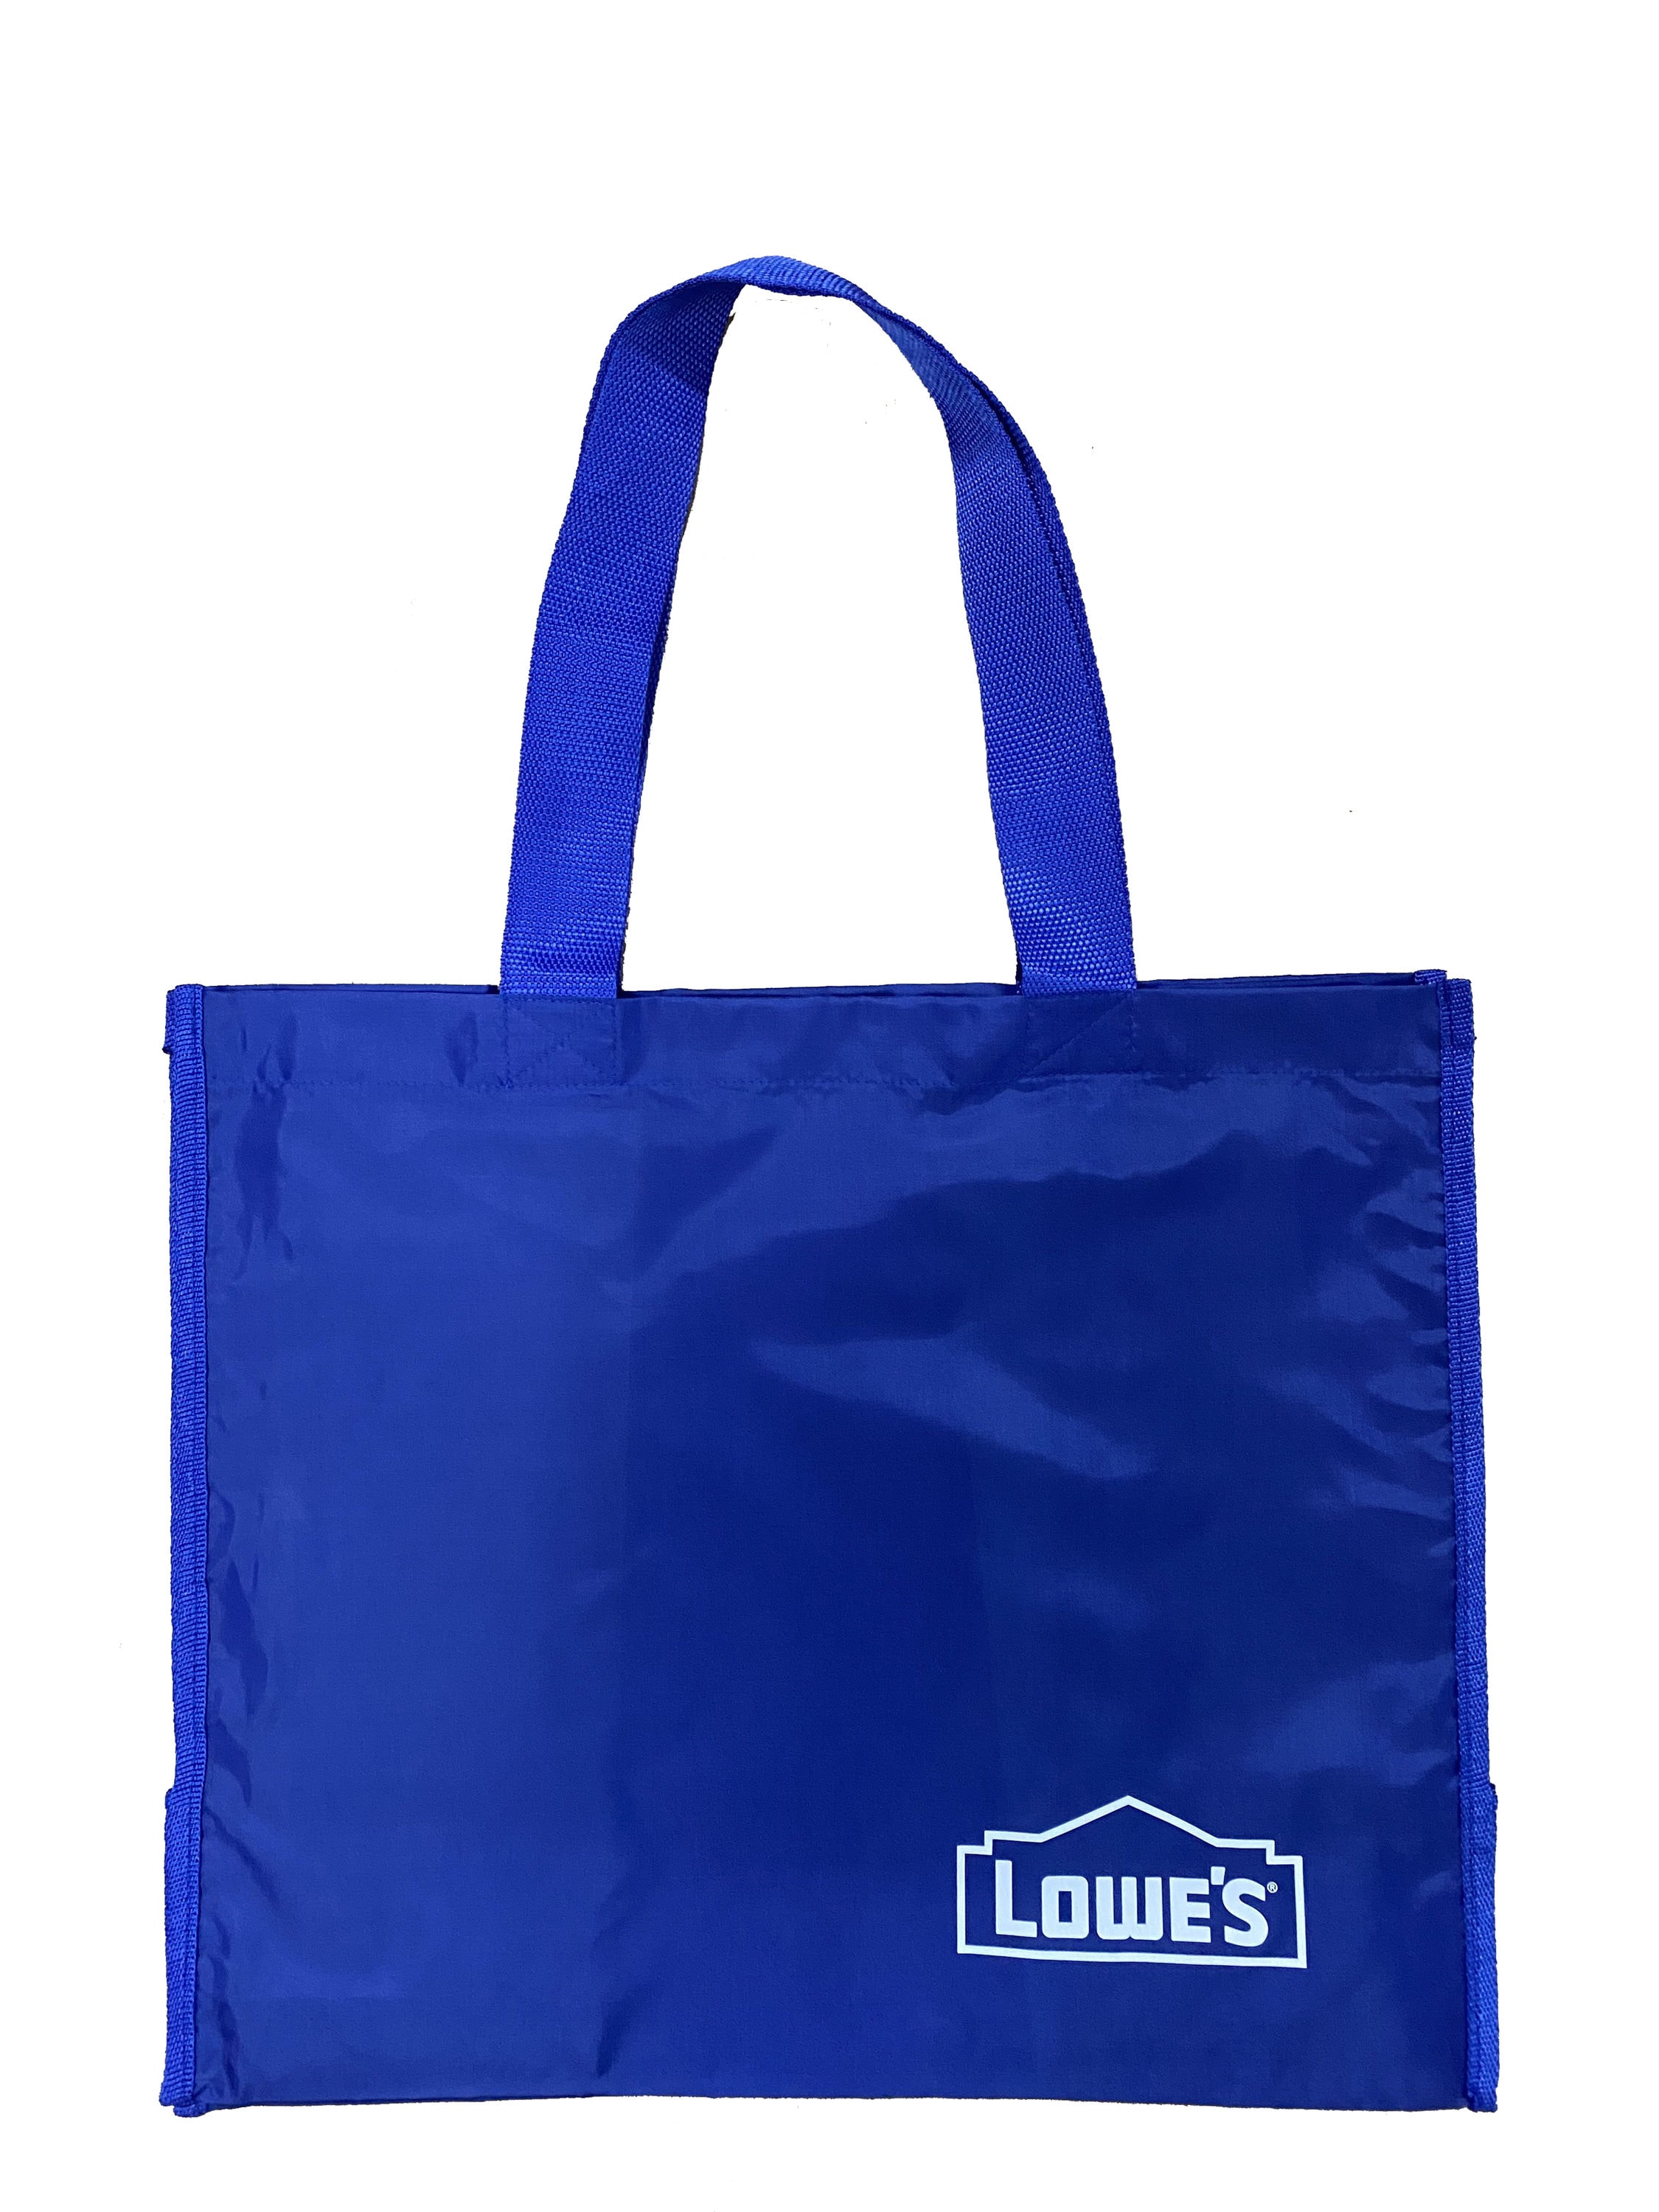 Luxury Designer Shopping Bags, assorted - clothing & accessories